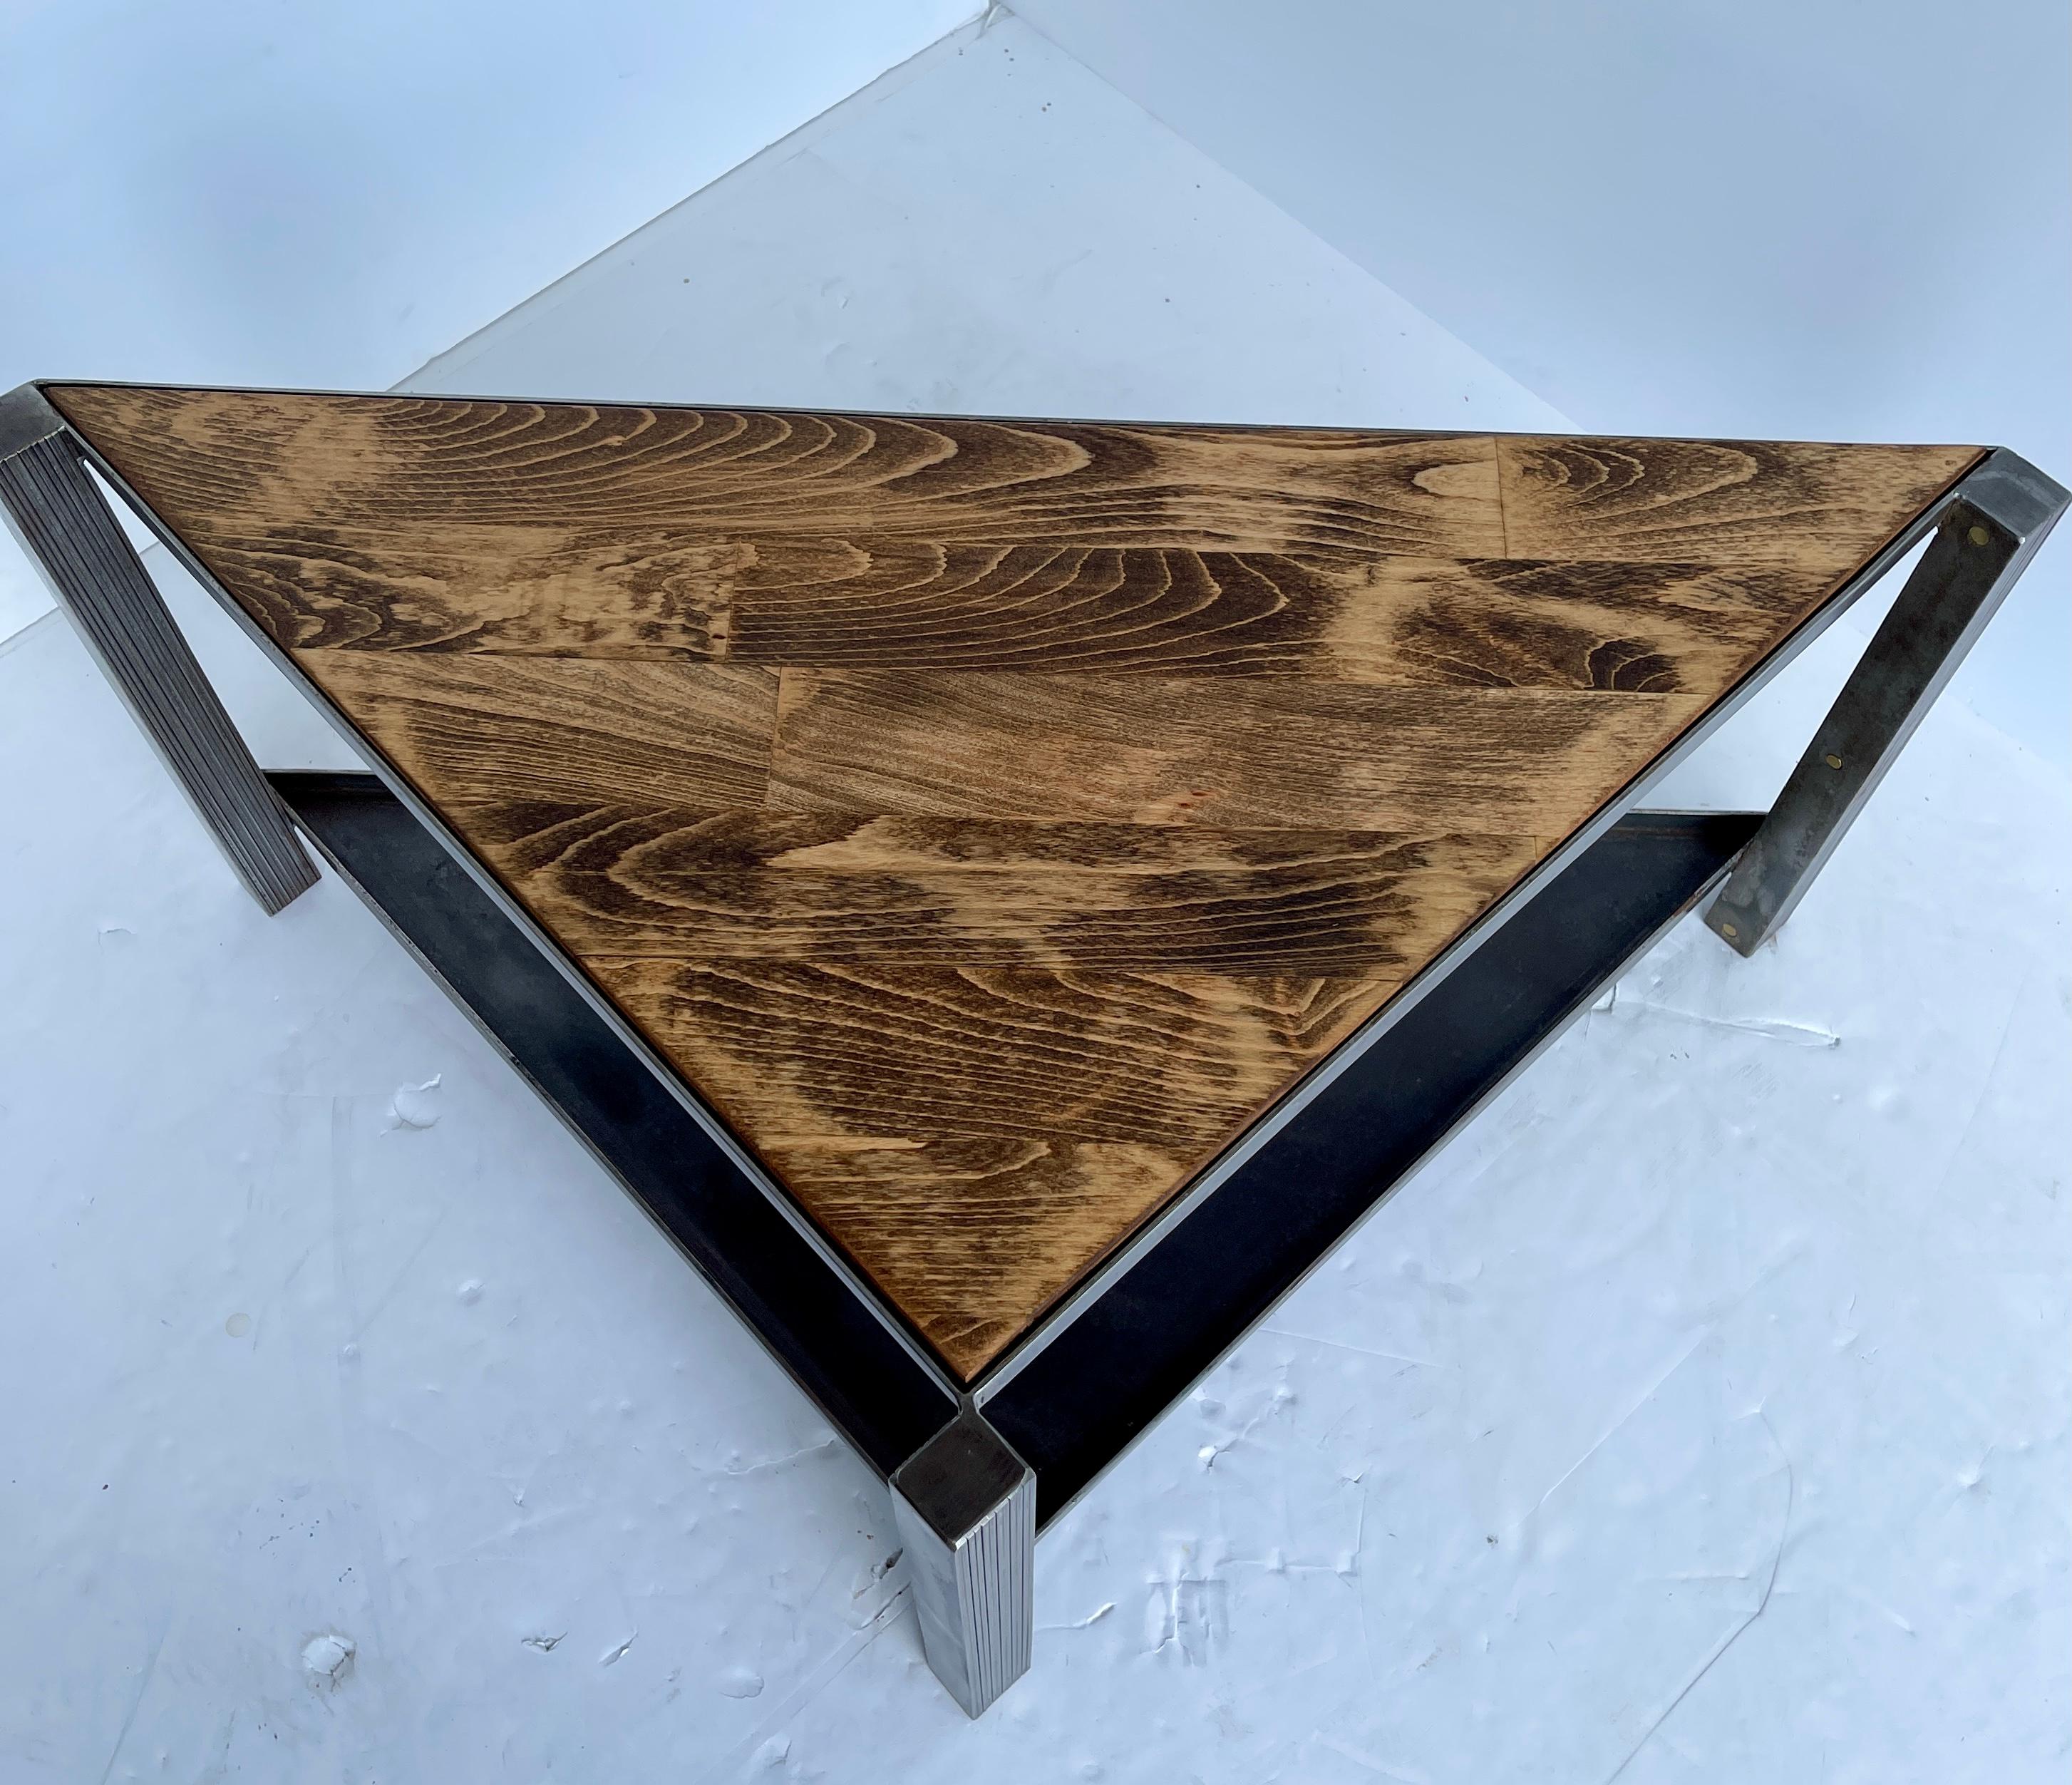 Custom made, one of a kind, stainless steel table with richly stained oak plank inset top and steel lower shelf. This modern low profile table has the best of industrial period with warmth of wood earthiness. The brass pegs on the three legs are a